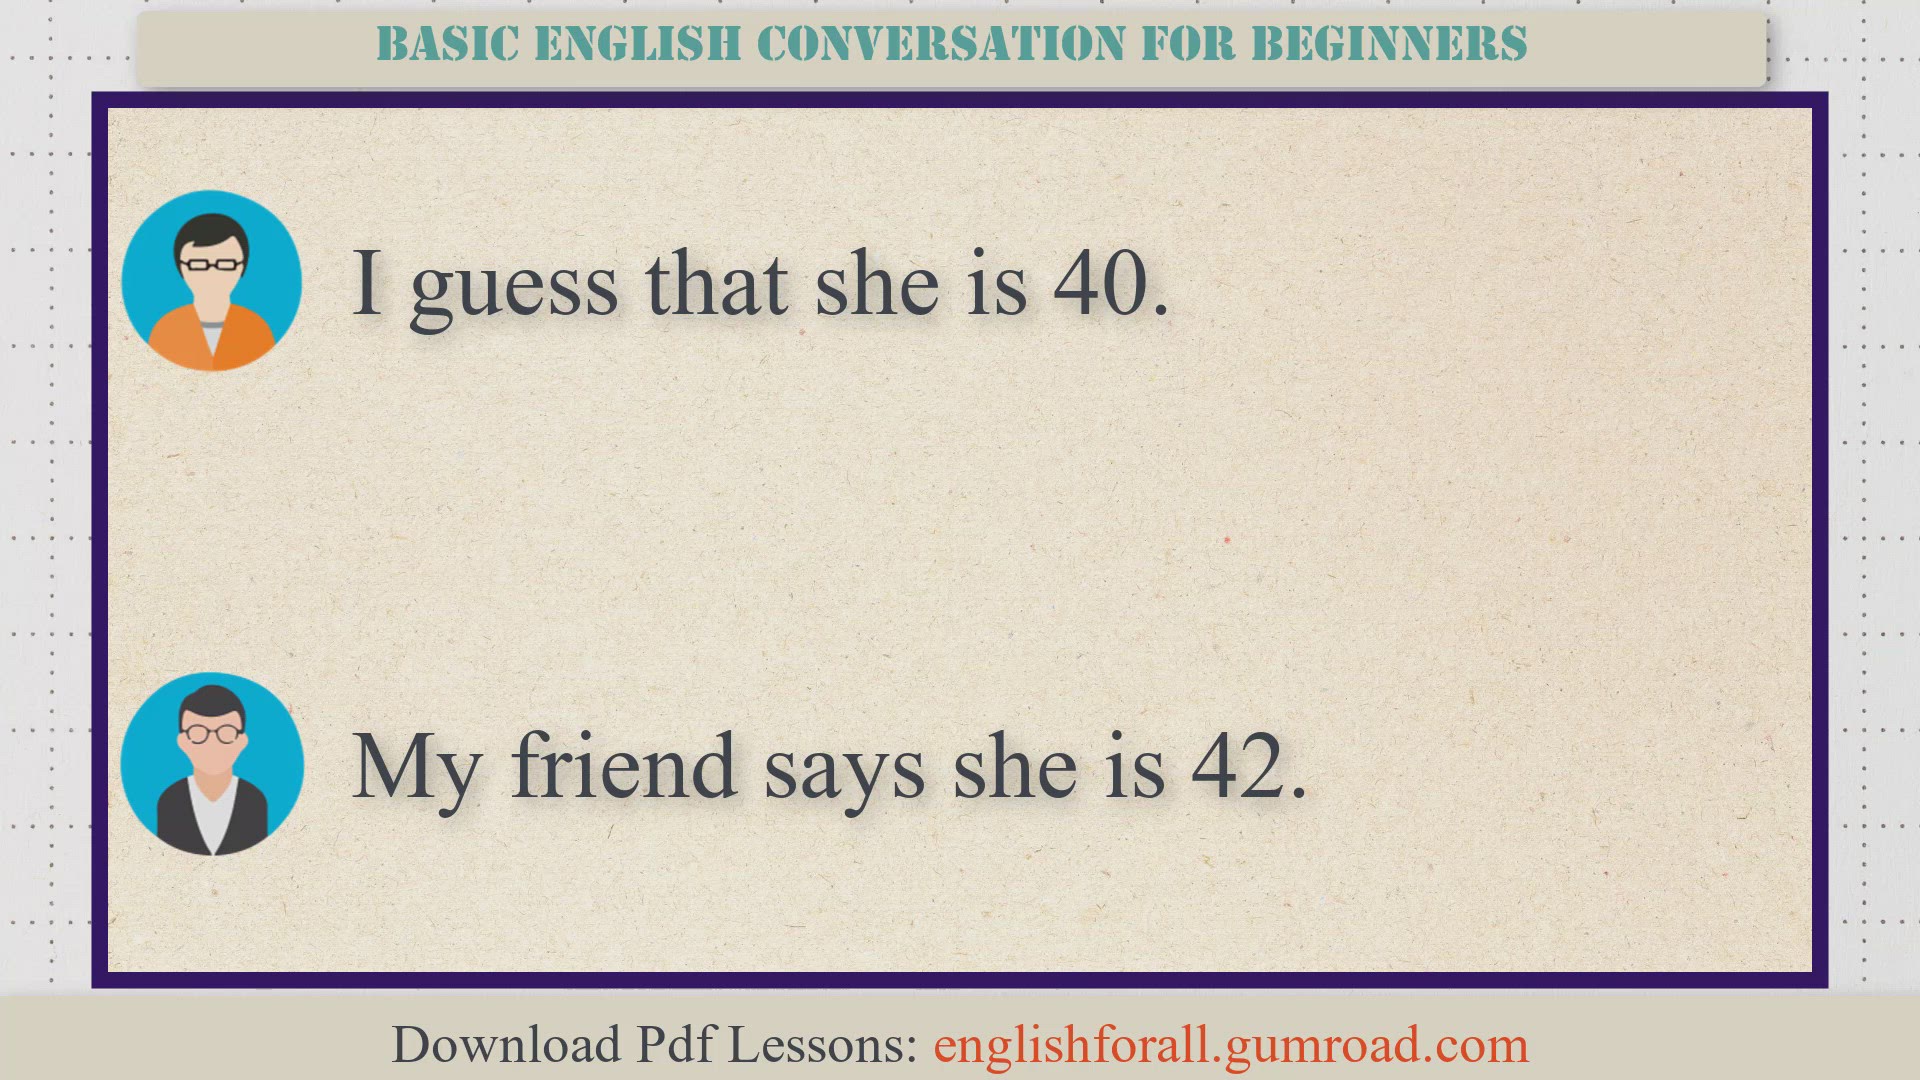 50 Audio Lessons) Common English Expressions and Daily Use English